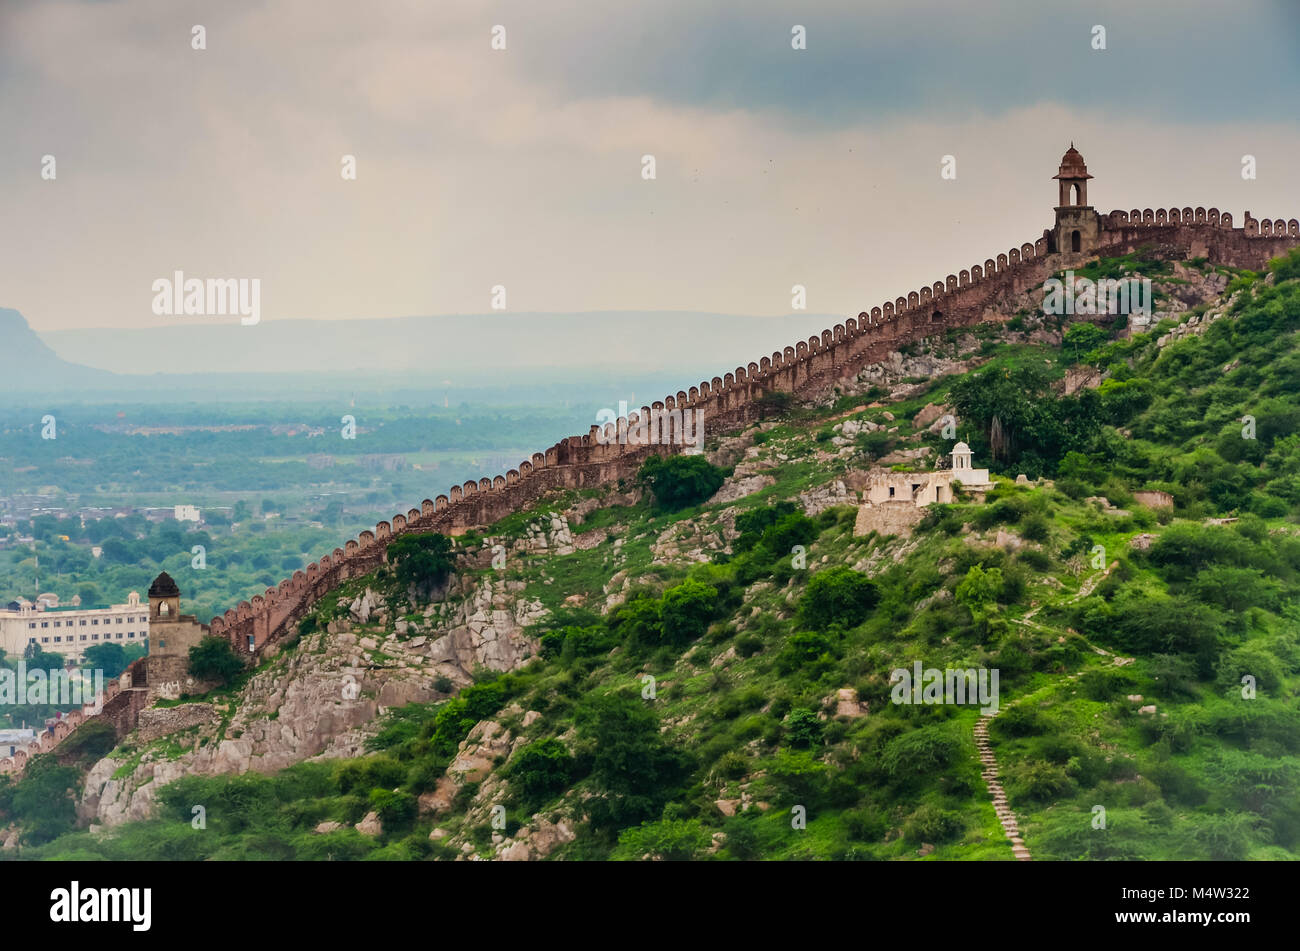 Ancient wall running between watch towers surrounding Amber Palace in Jaipur, Rajasthan, India. Stock Photo